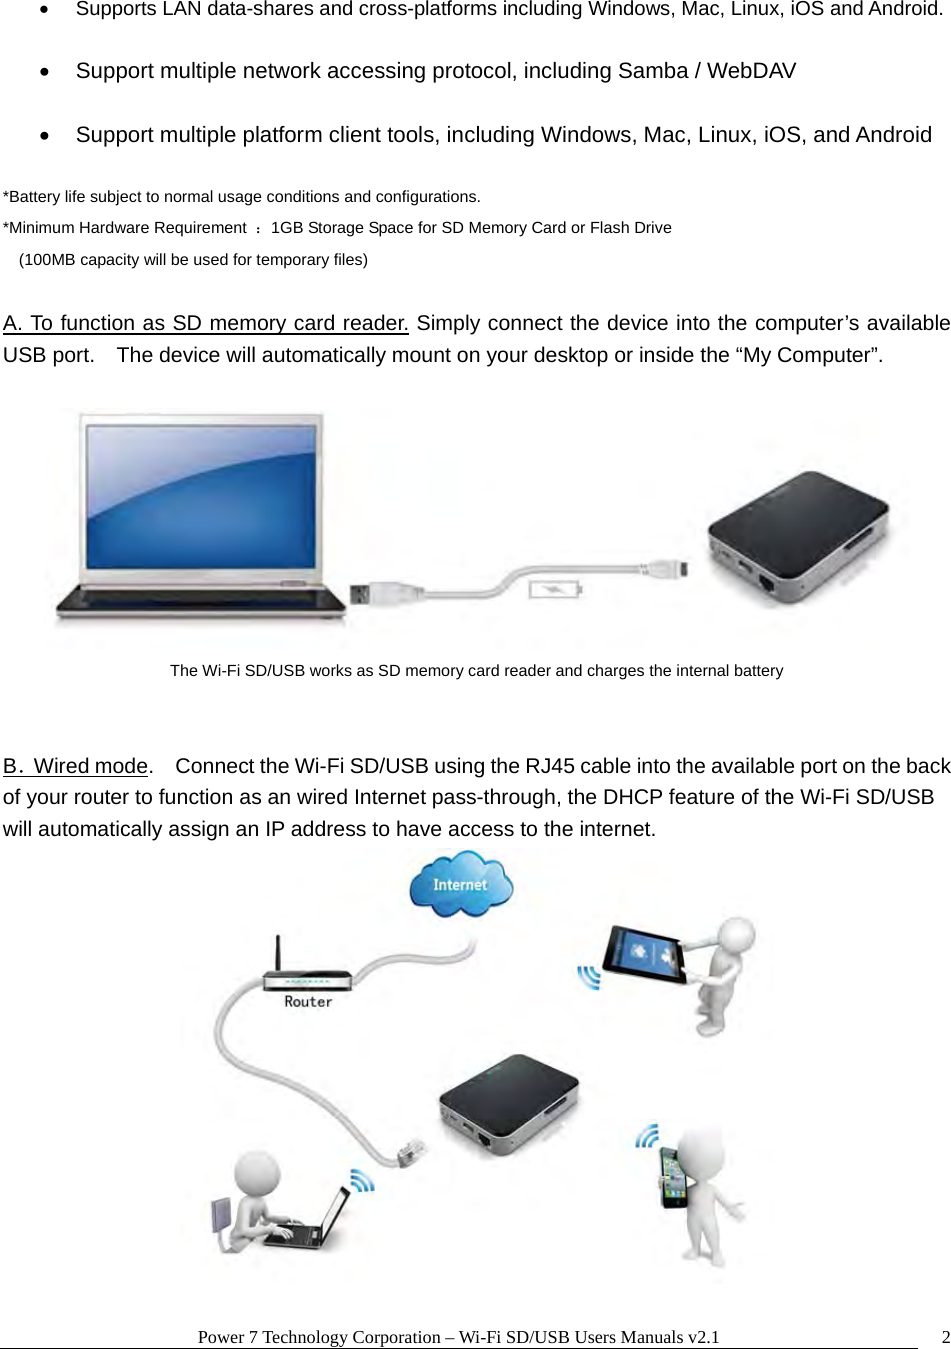 Power 7 Technology Corporation – Wi-Fi SD/USB Users Manuals v2.1  2  Supports LAN data-shares and cross-platforms including Windows, Mac, Linux, iOS and Android.    Support multiple network accessing protocol, including Samba / WebDAV    Support multiple platform client tools, including Windows, Mac, Linux, iOS, and Android  *Battery life subject to normal usage conditions and configurations. *Minimum Hardware Requirement  ：1GB Storage Space for SD Memory Card or Flash Drive  (100MB capacity will be used for temporary files)  A. To function as SD memory card reader. Simply connect the device into the computer’s available USB port.    The device will automatically mount on your desktop or inside the “My Computer”.       The Wi-Fi SD/USB works as SD memory card reader and charges the internal battery   B．Wired mode.    Connect the Wi-Fi SD/USB using the RJ45 cable into the available port on the back of your router to function as an wired Internet pass-through, the DHCP feature of the Wi-Fi SD/USB will automatically assign an IP address to have access to the internet.  